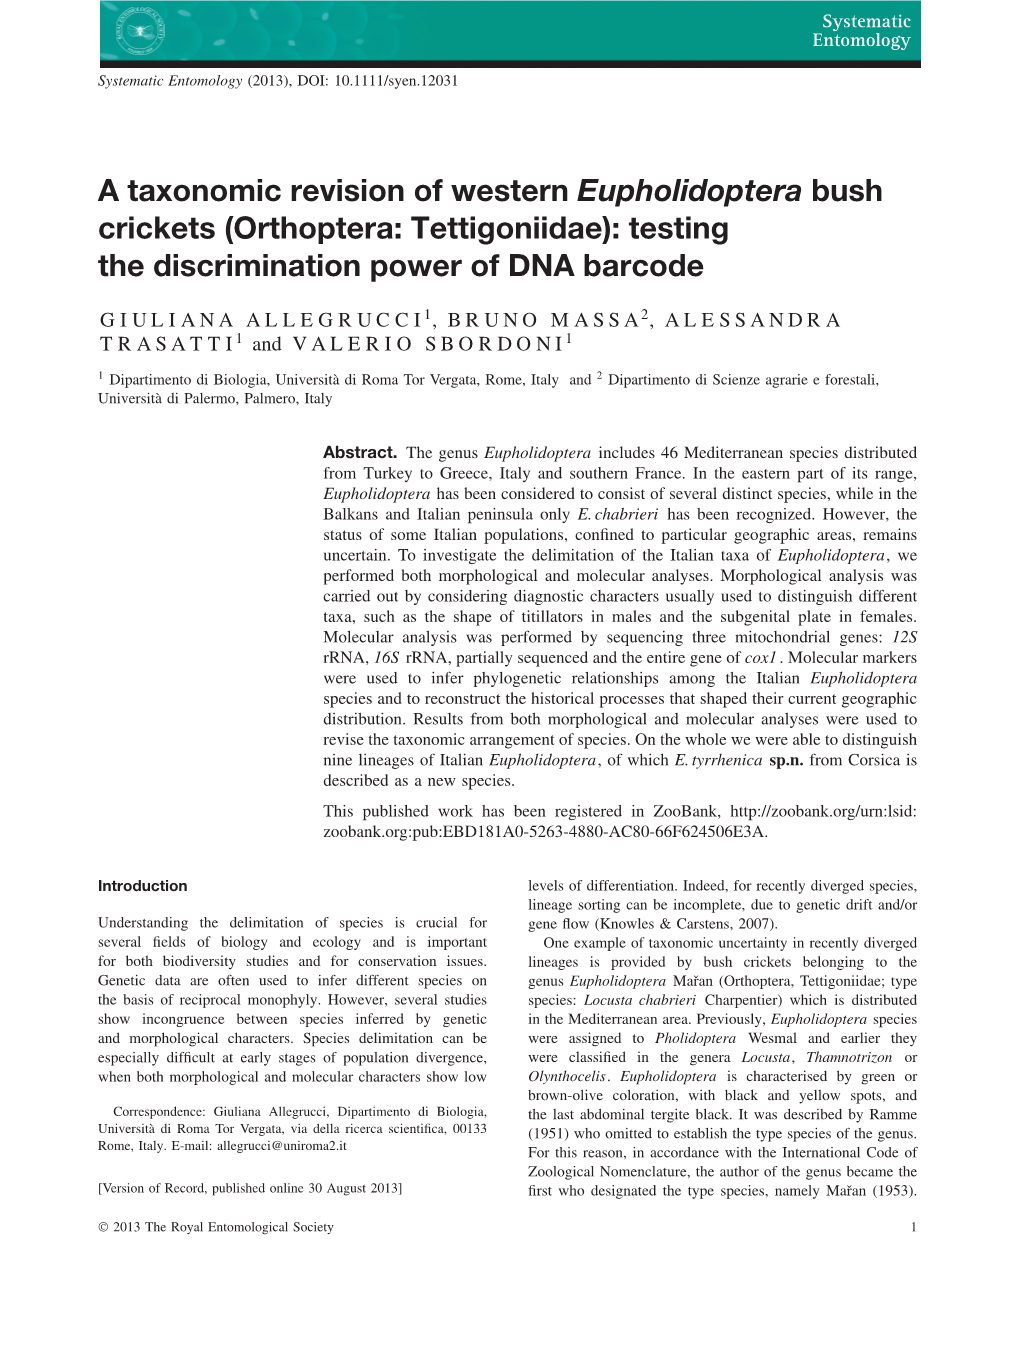 A Taxonomic Revision of Western Eupholidoptera Bush Crickets (Orthoptera: Tettigoniidae): Testing the Discrimination Power of DNA Barcode